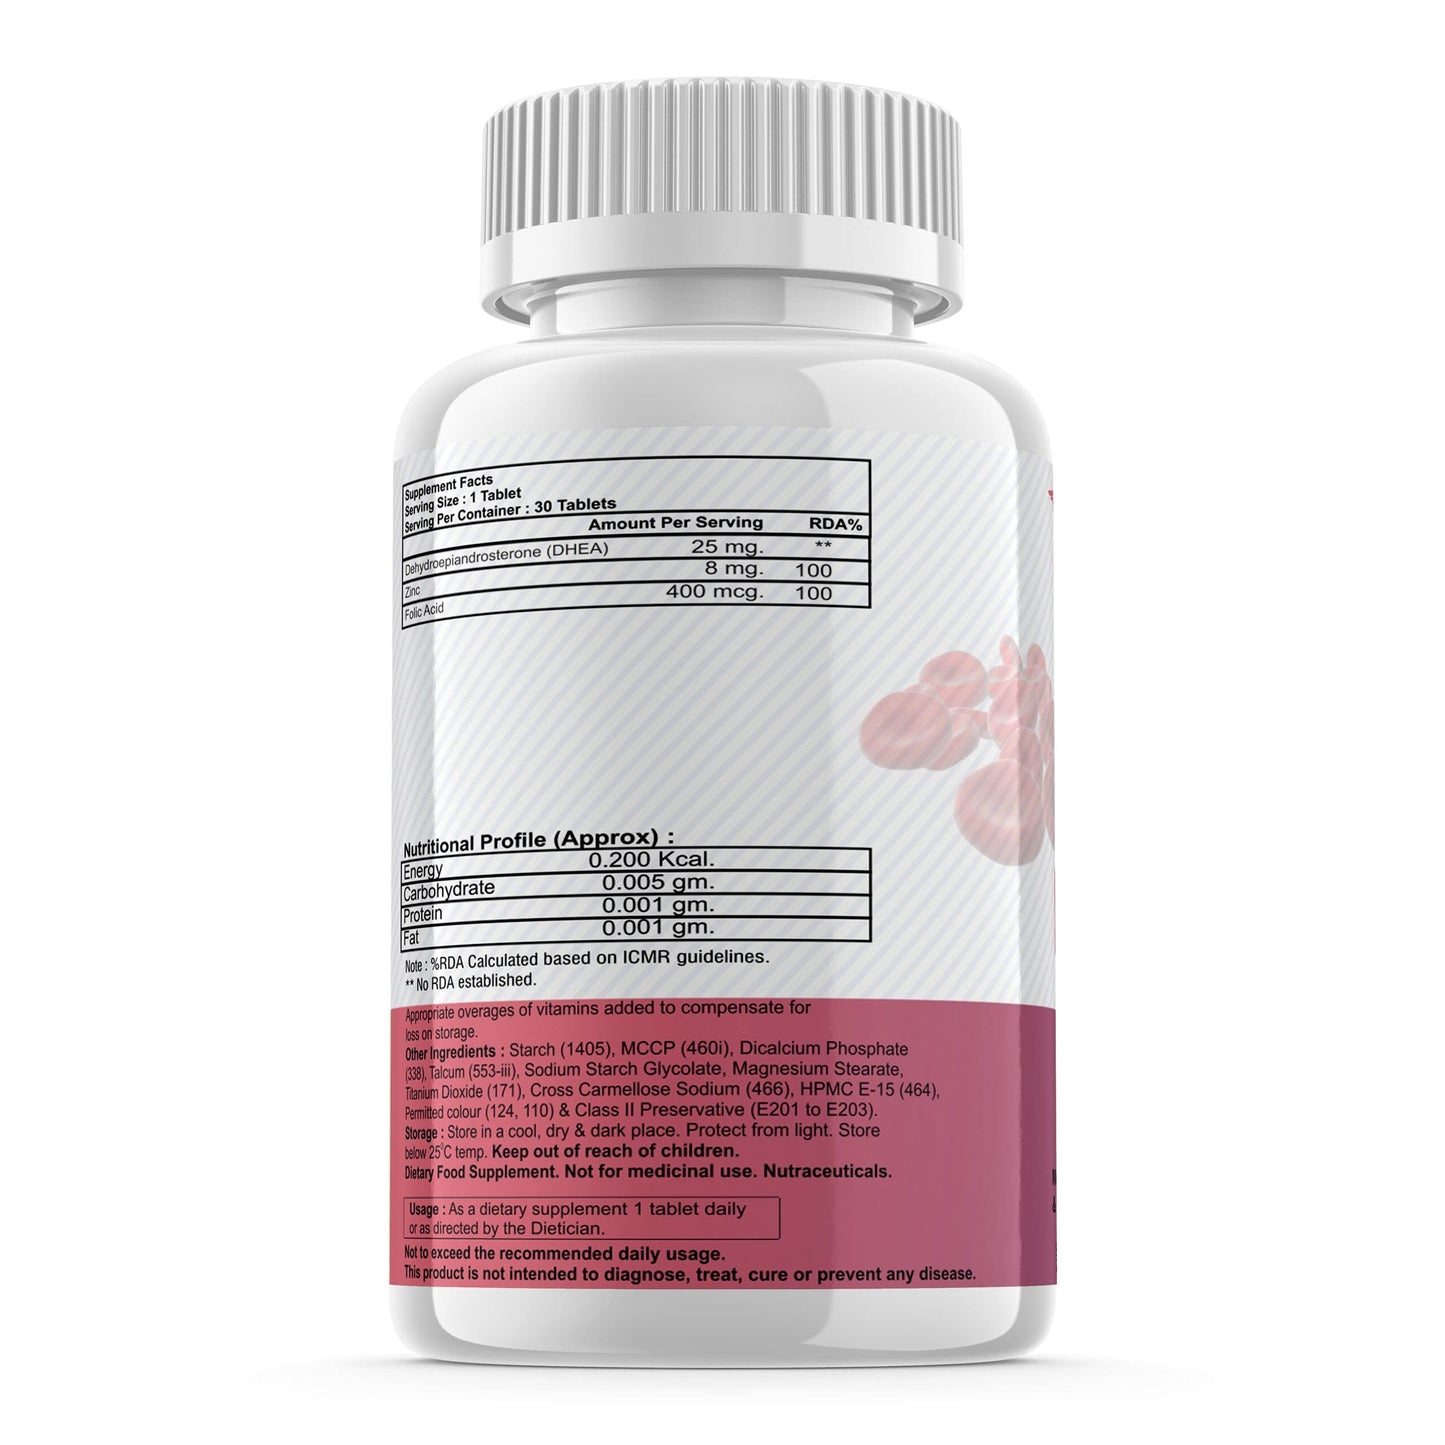 1MD NUTRITION | DHEA for Overall Well-Being | Promotes Healthy Mood & Vitality